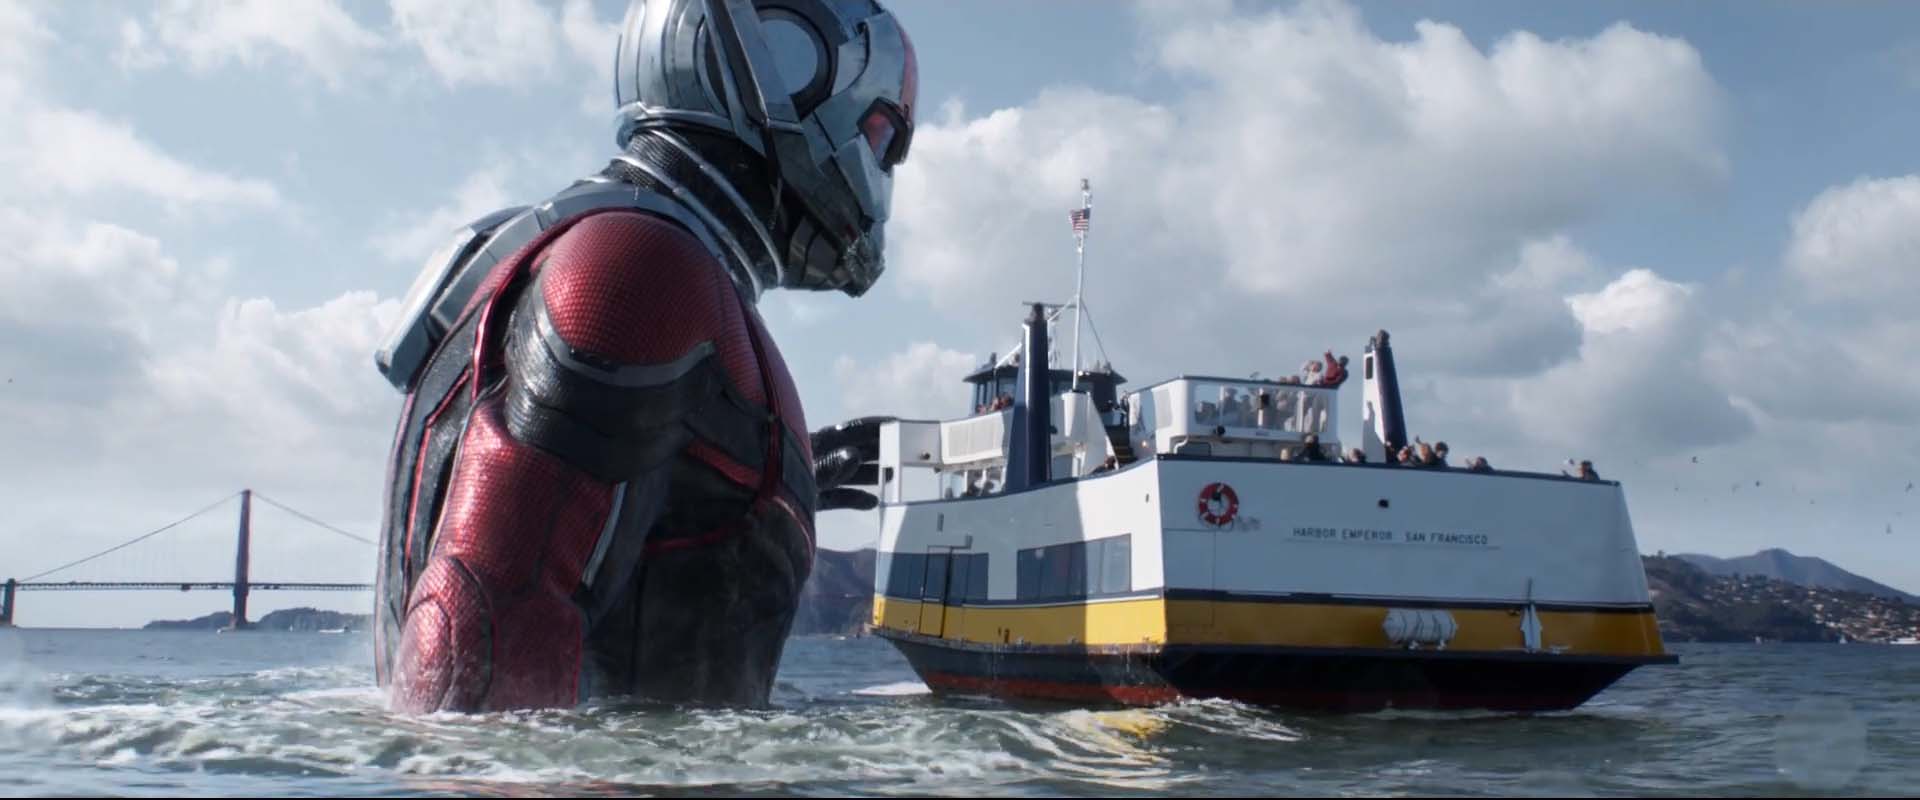 Ant-Man and the Wasp Movie Review